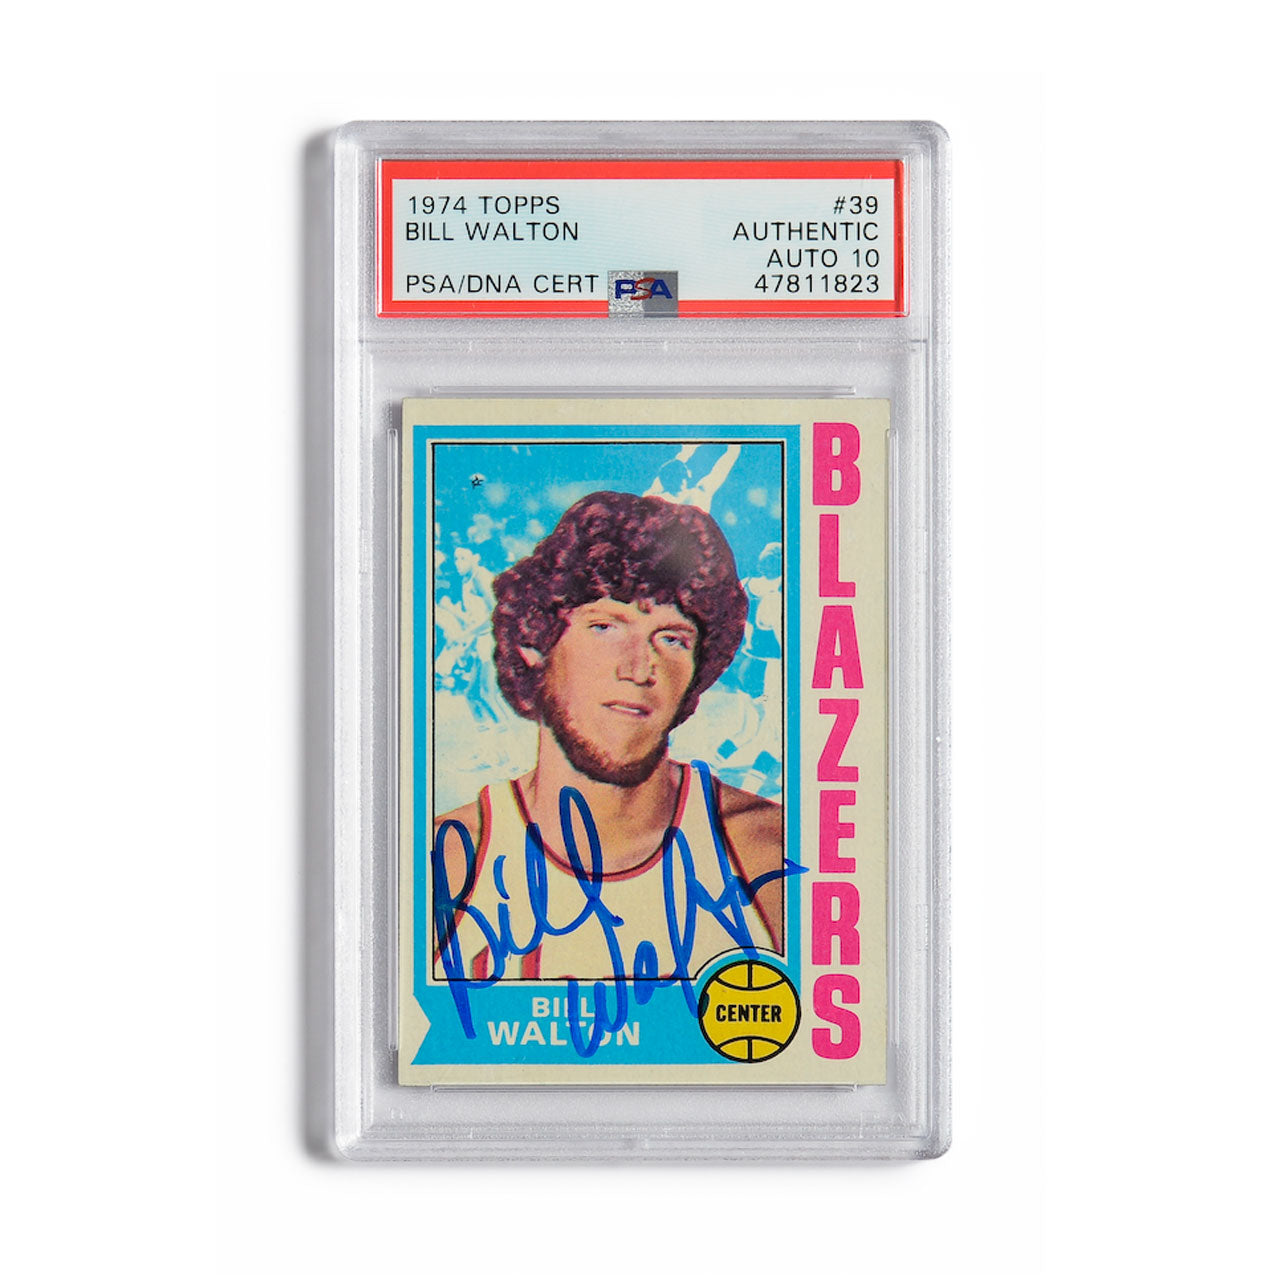 1974 Topps Bill Walton Autographed Rookie Card